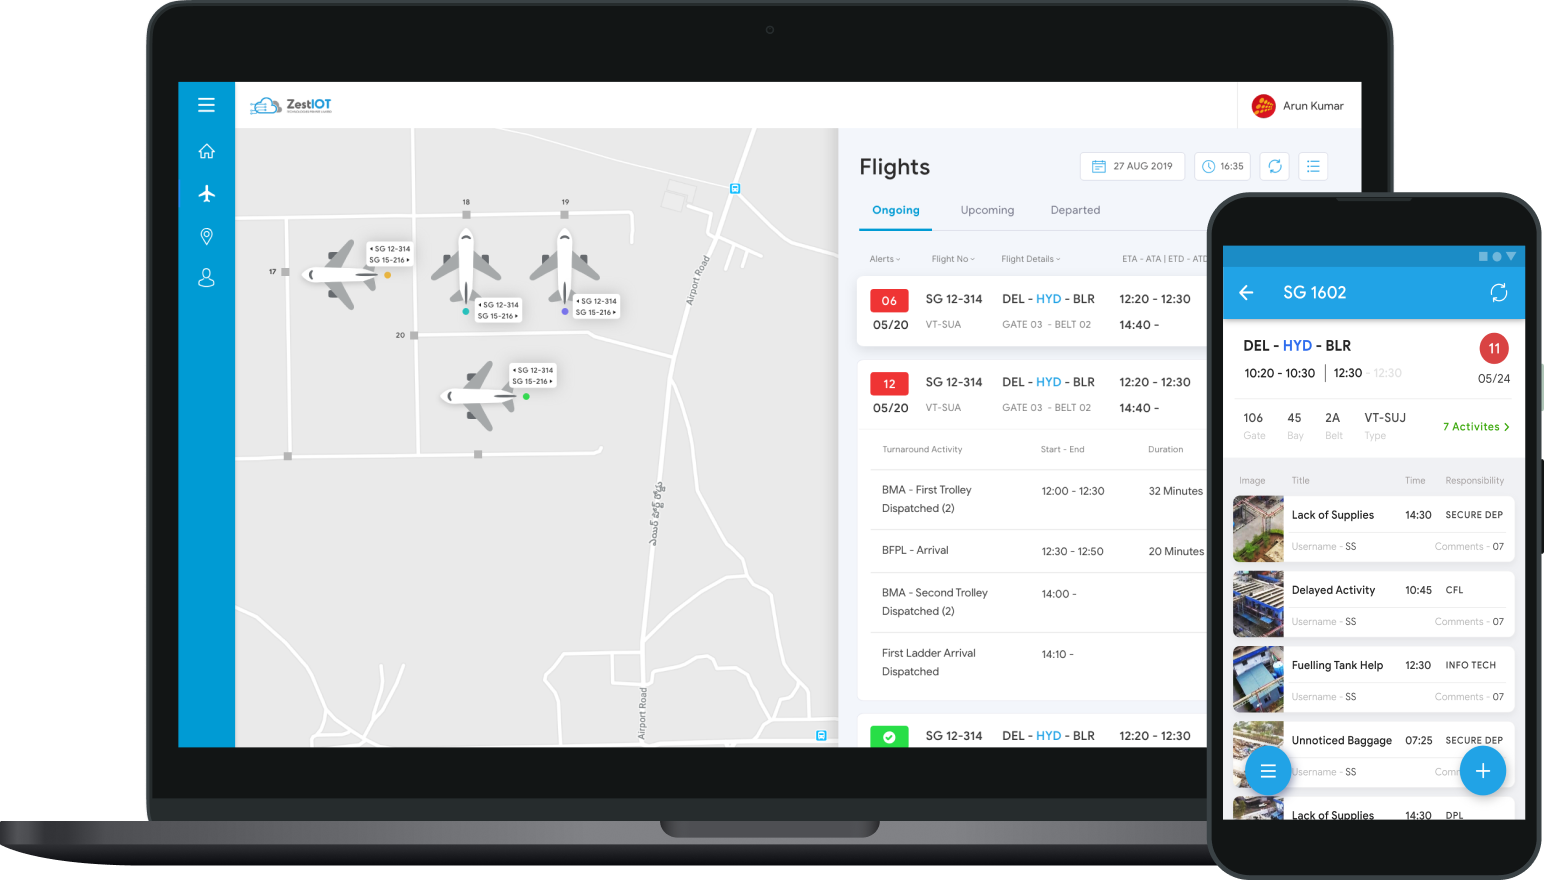 IoT and AI-enabled Aviation Platform that Integrates Passenger and Airport Operations